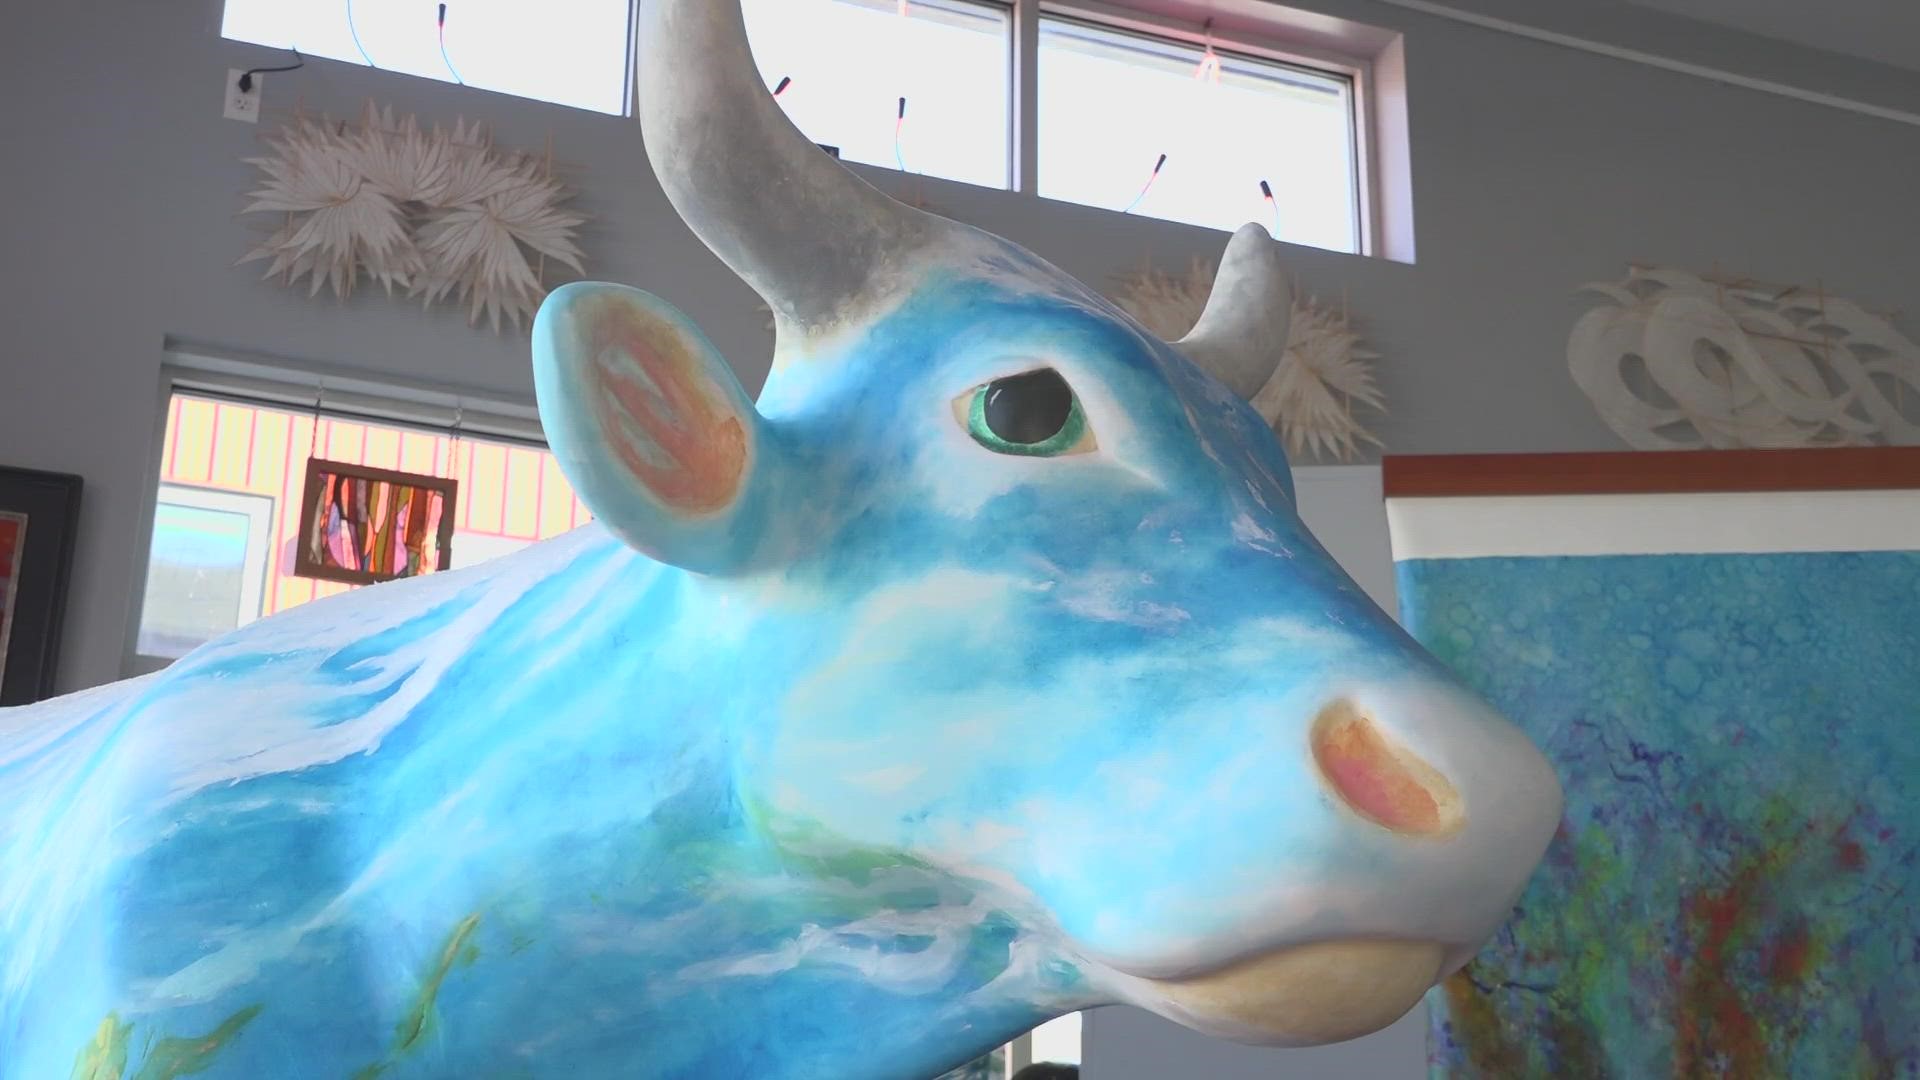 Russ Cox and Eamon White have been selected to paint cow sculptures for the 2023 Cow Parade New England, which will benefit the Dana-Farber Cancer Institute.